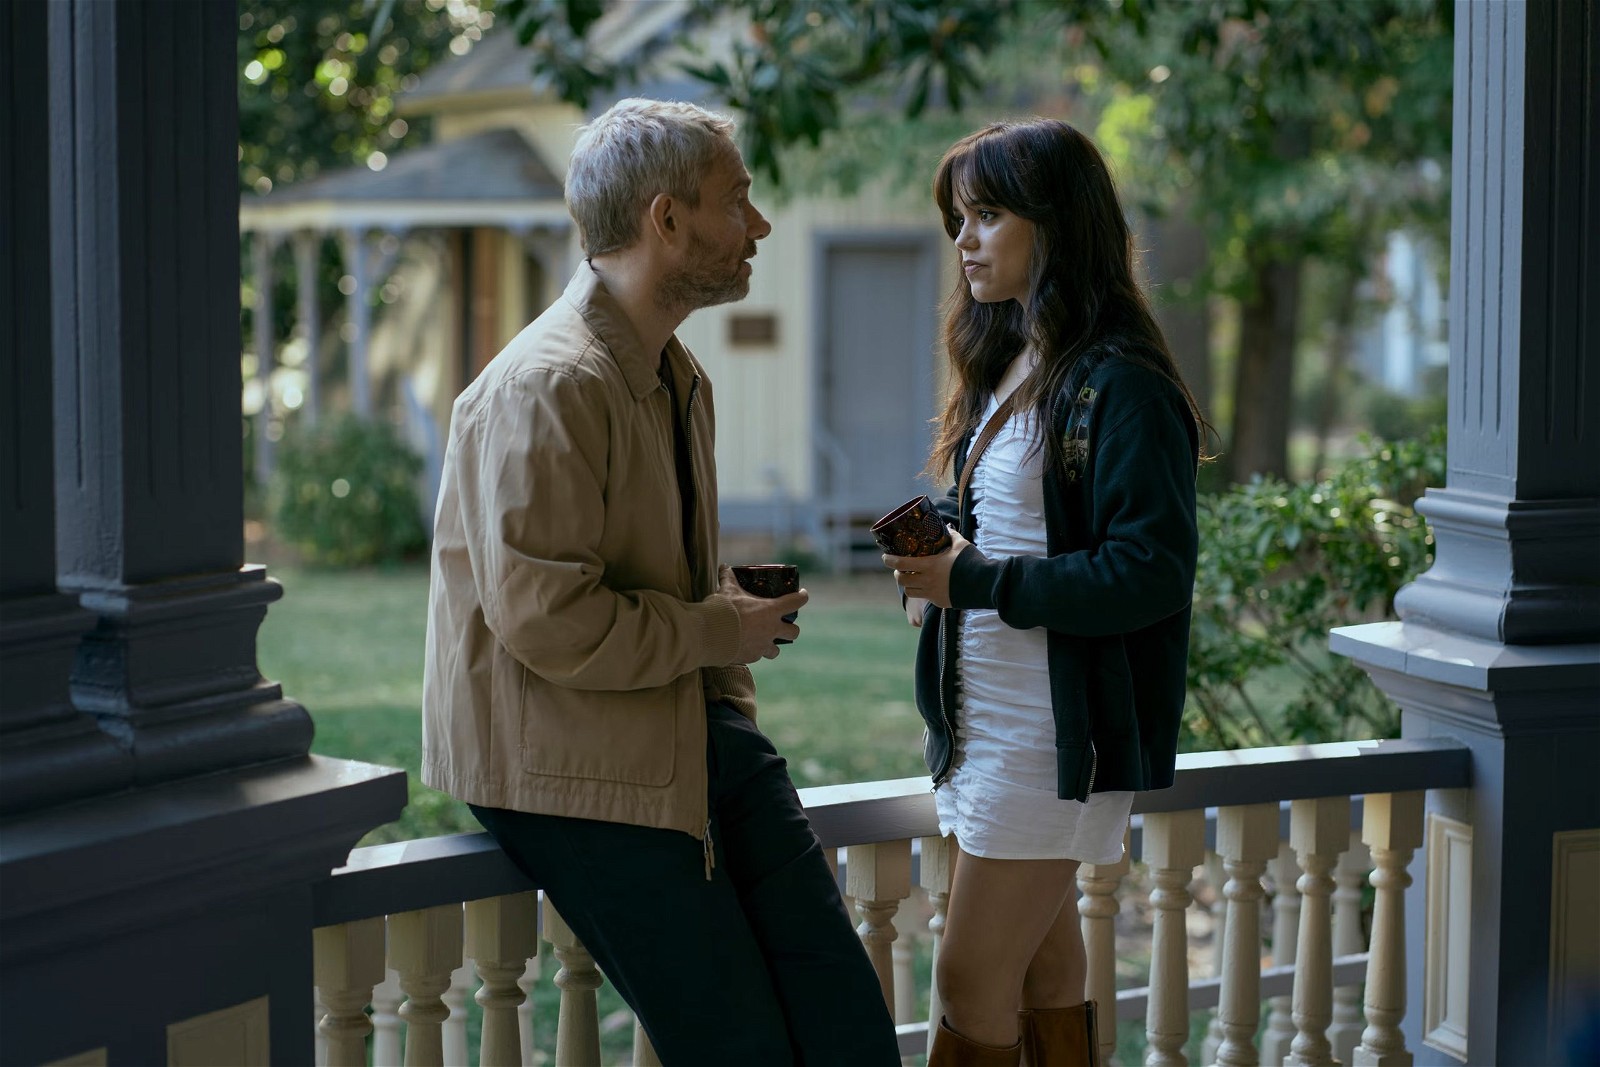 Martin Freeman and Jenna Ortega bond over coffee at the porch of a house in Miller's Girl